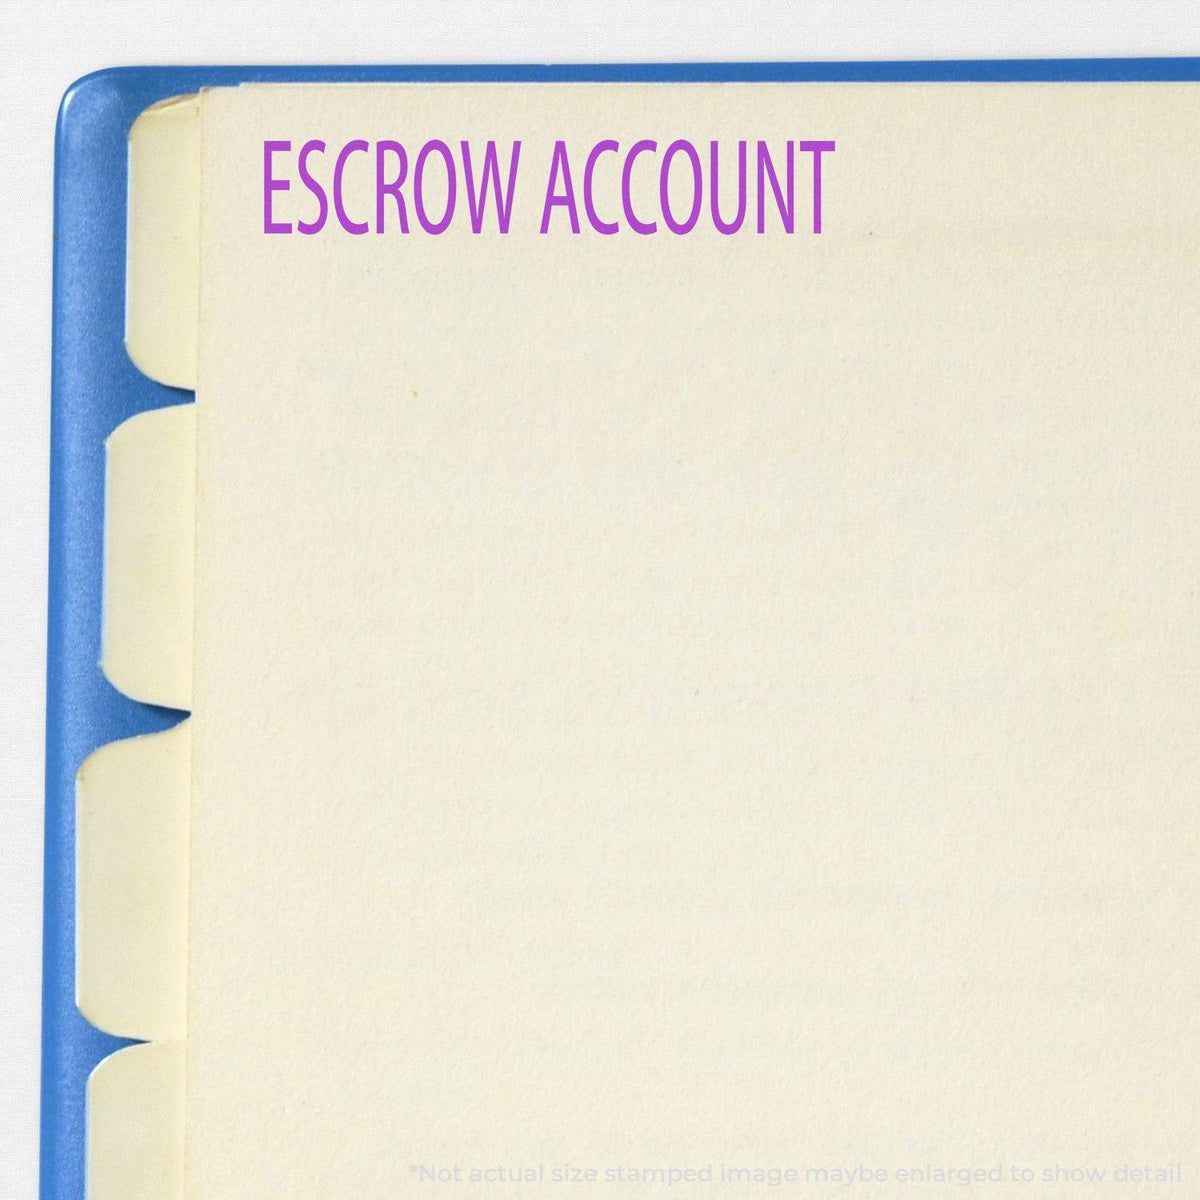 In Use Escrow Account Rubber Stamp Image